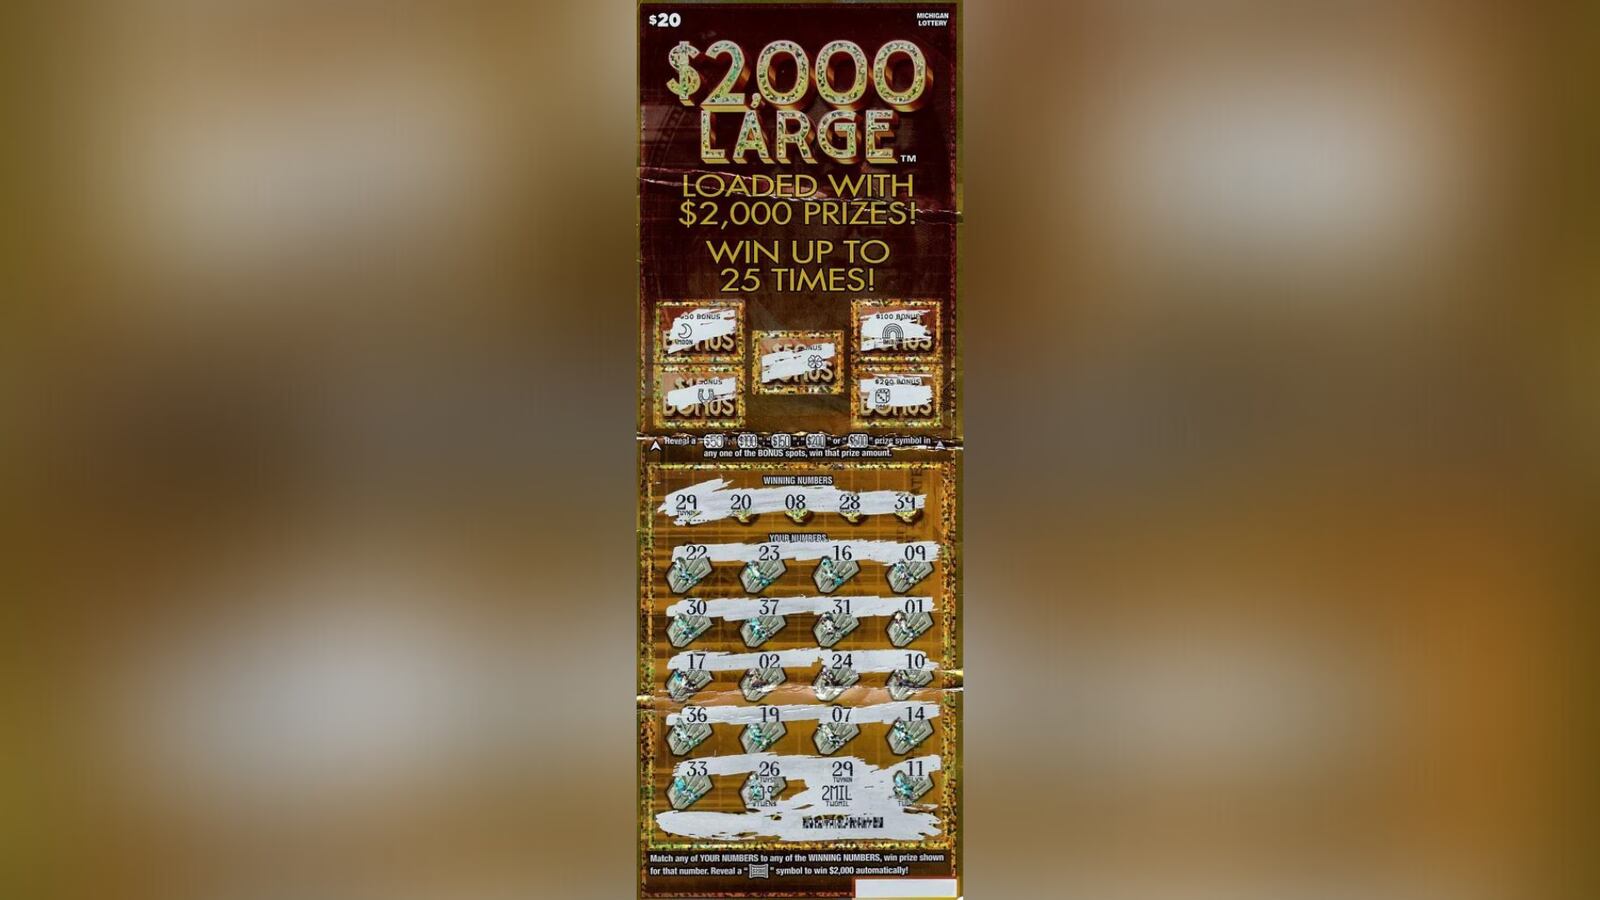 Woman picking up pizza for dinner wins 2M playing lottery KIRO 7